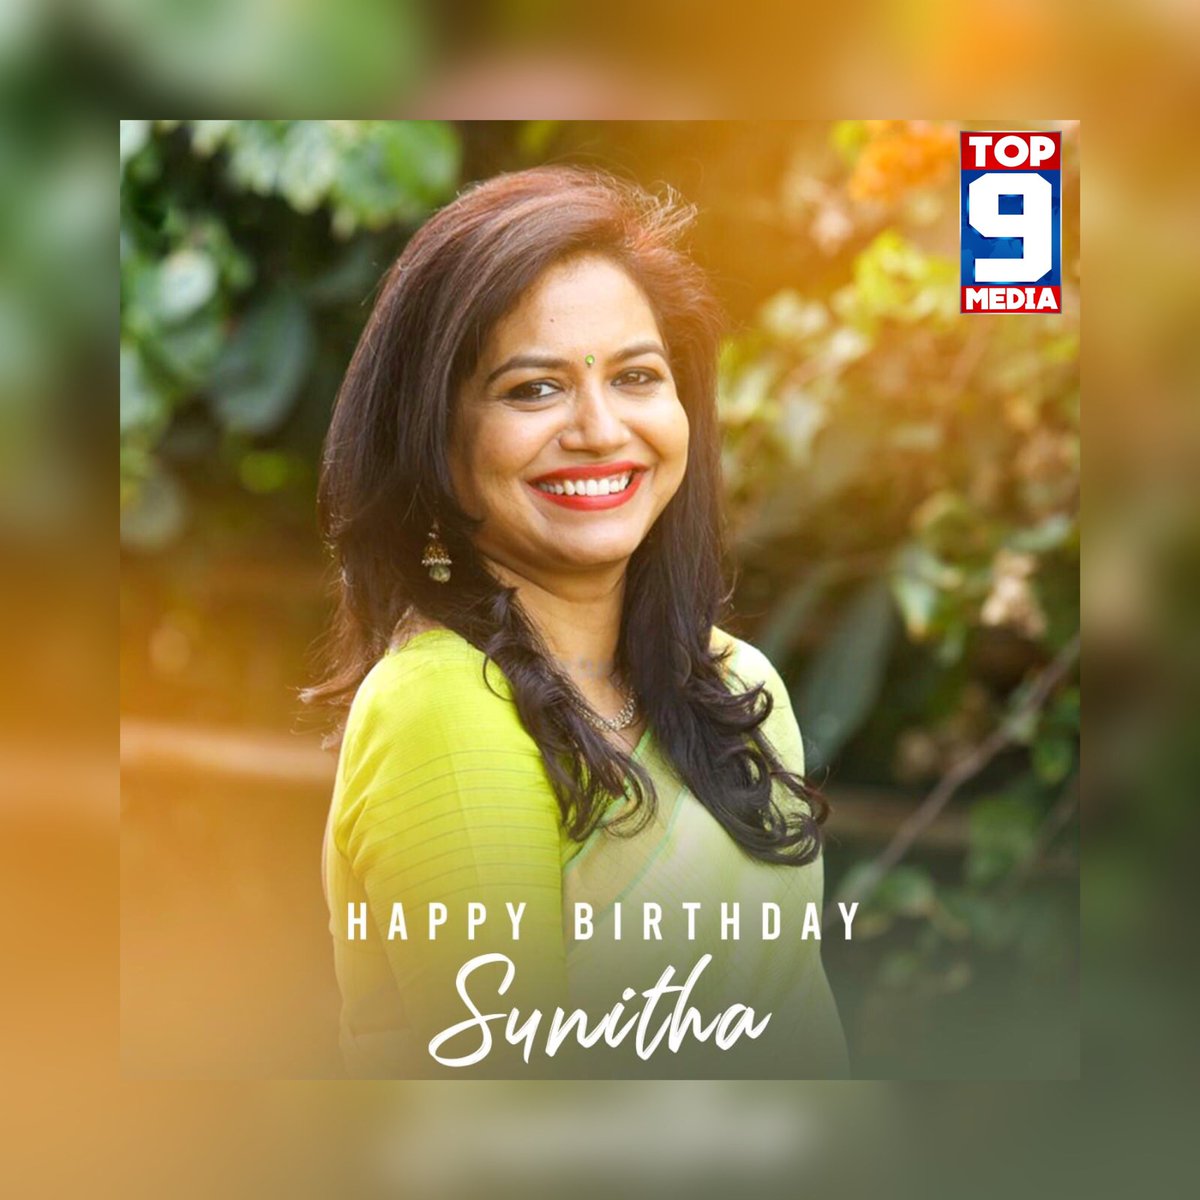 Sending Out Birthday Wishes To Singer #Sunitha!!

#HappyBirthdaySunitha #HBDSunitha #SingerSunitha 
#TOP9MEDIA